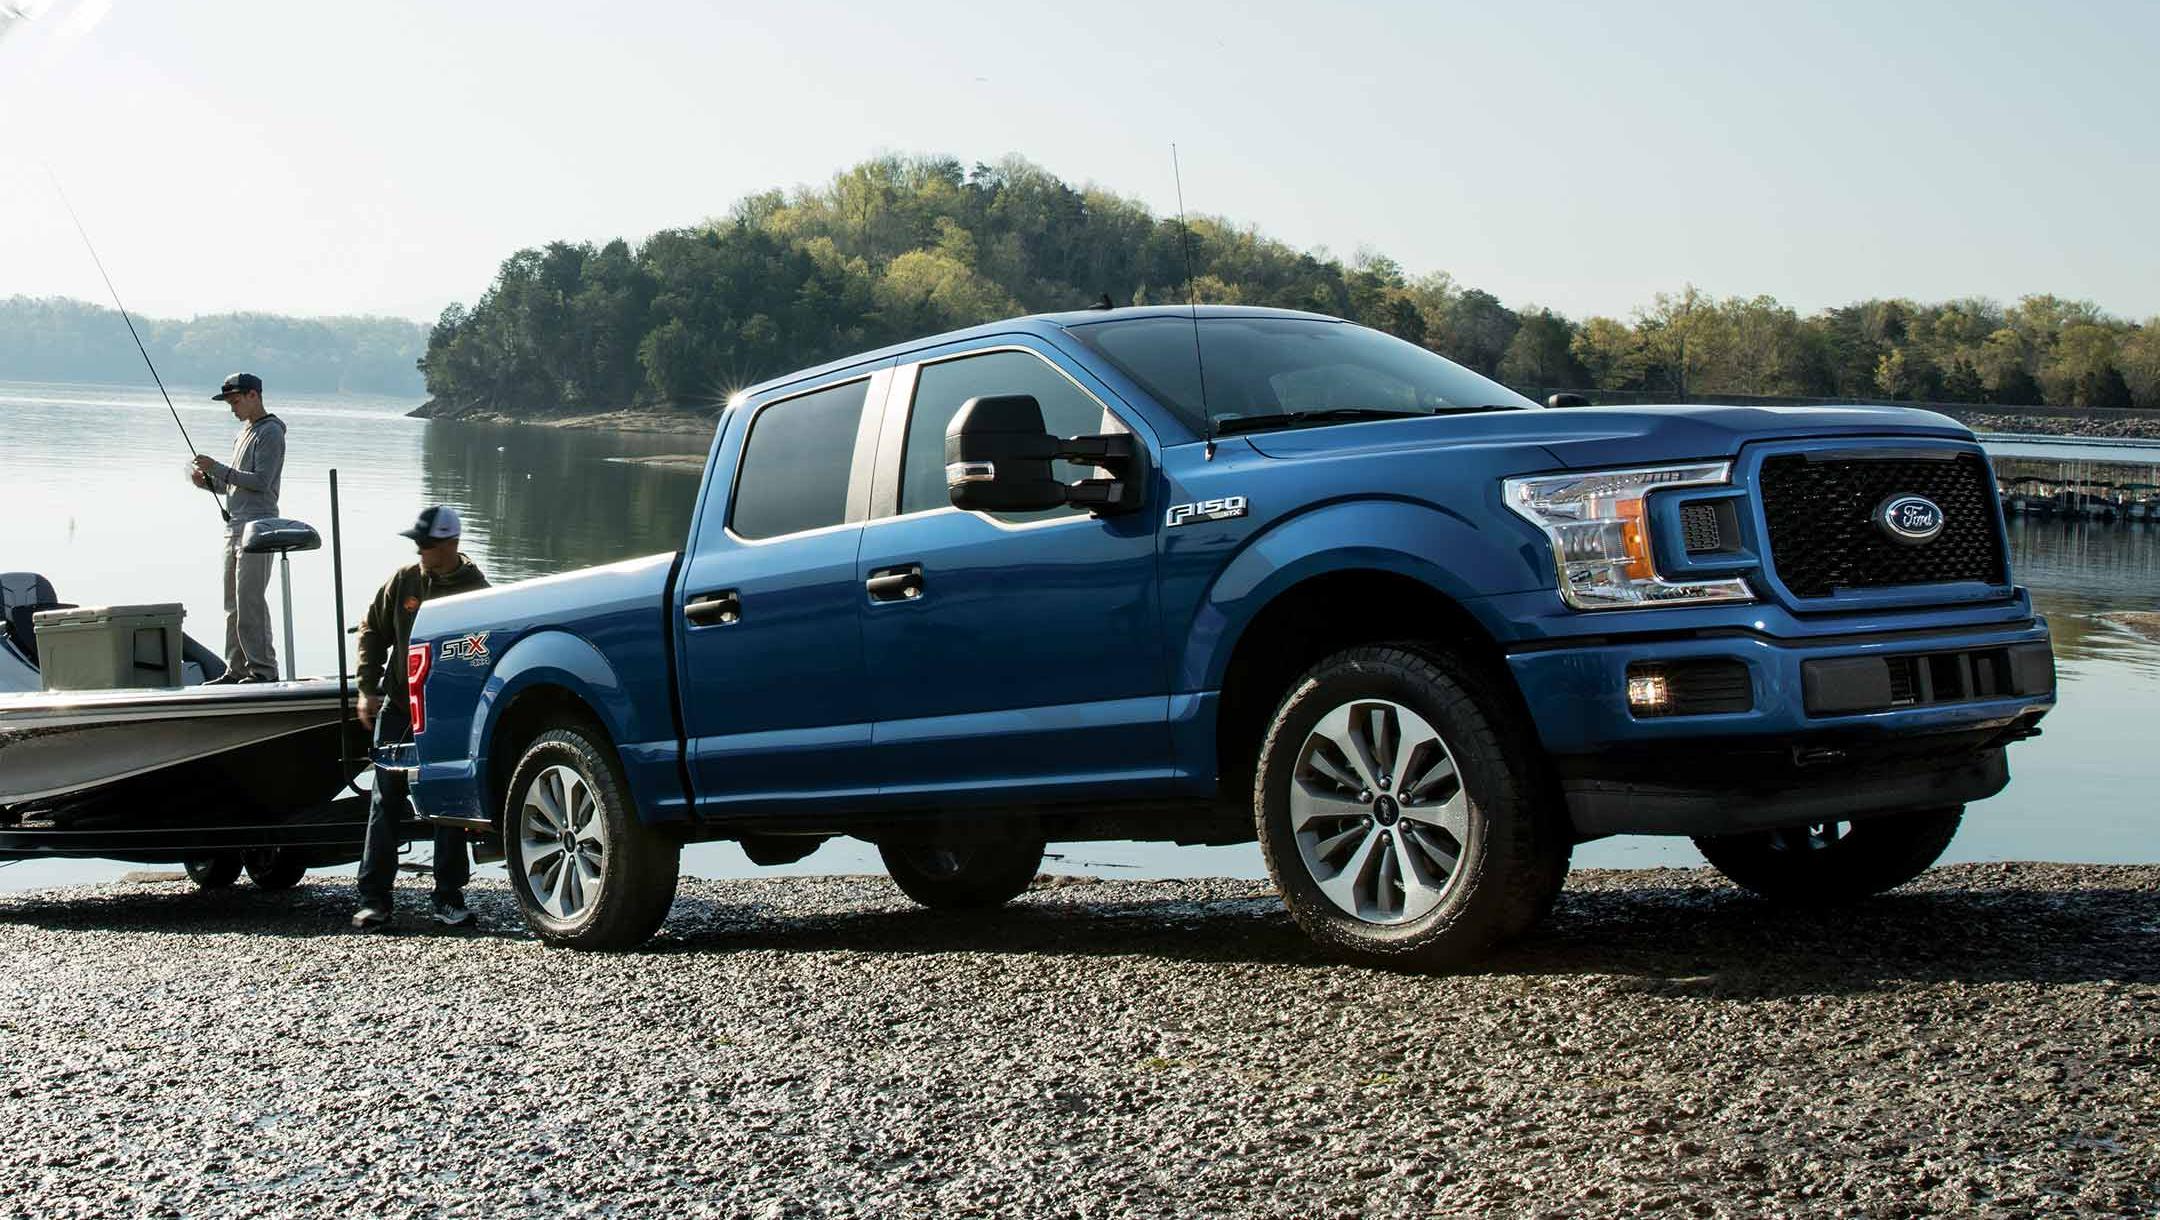 Introducing the Ford Blue Advantage 14-Day/1,000-Mile Money Back Guarantee*